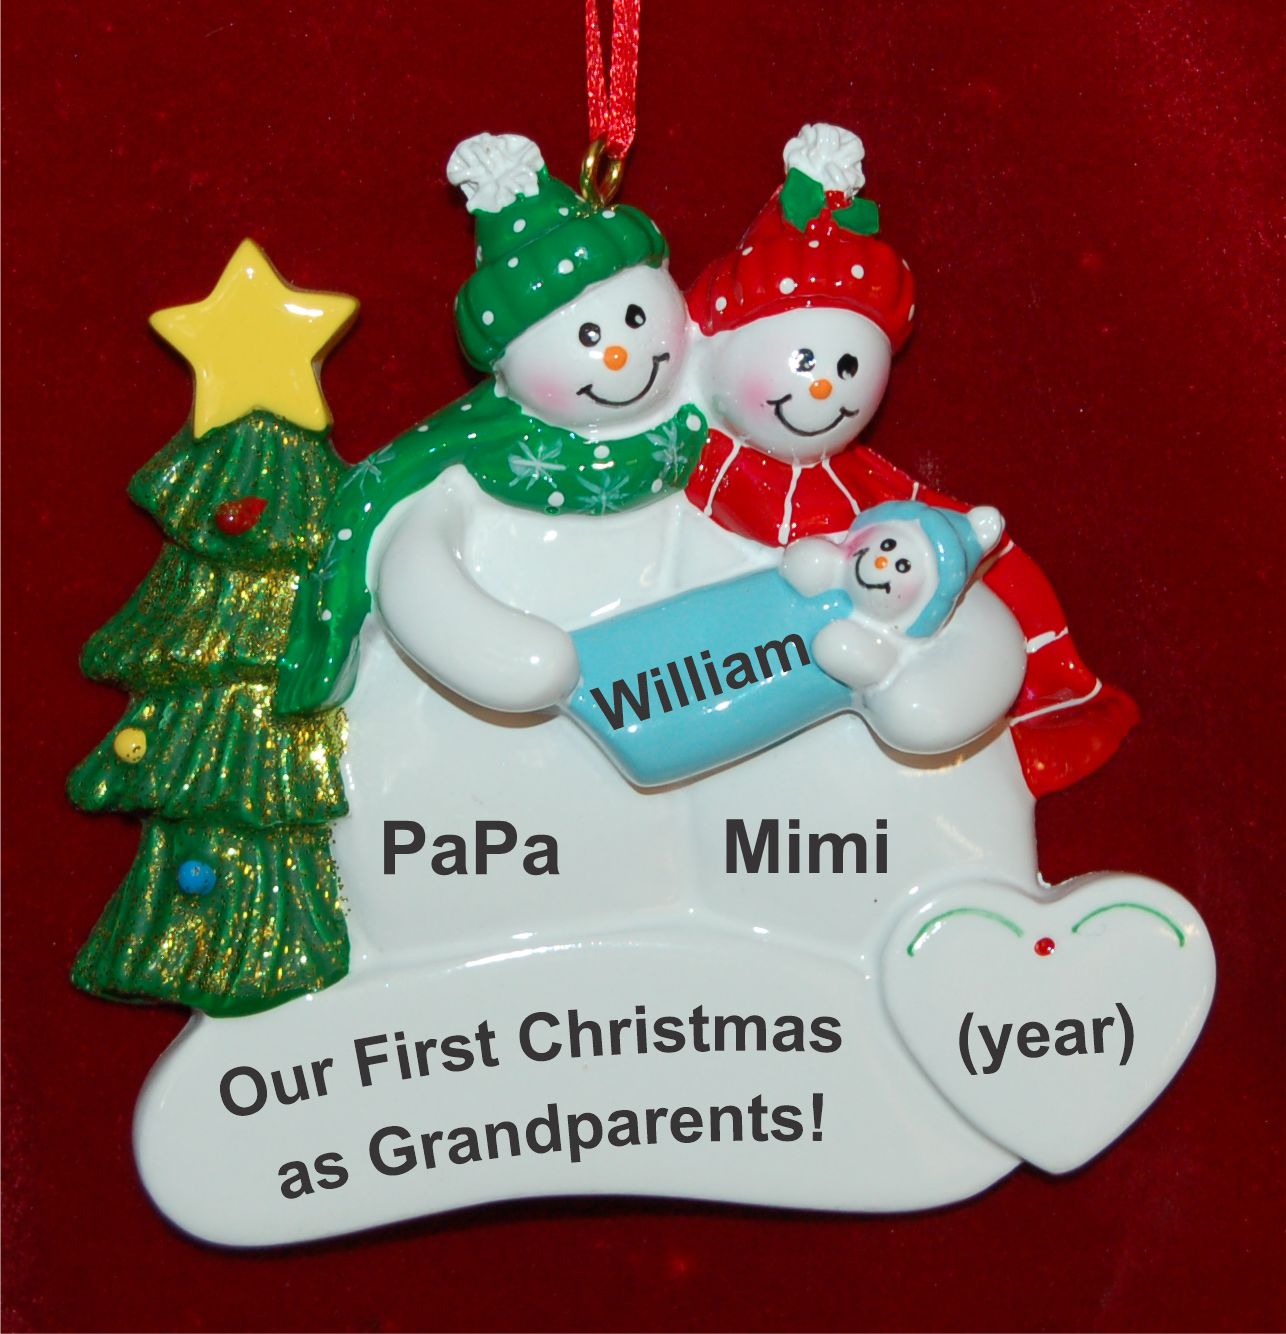 Our First Christmas as Grandparents with Baby Boy Christmas Ornament Personalized by RussellRhodes.com